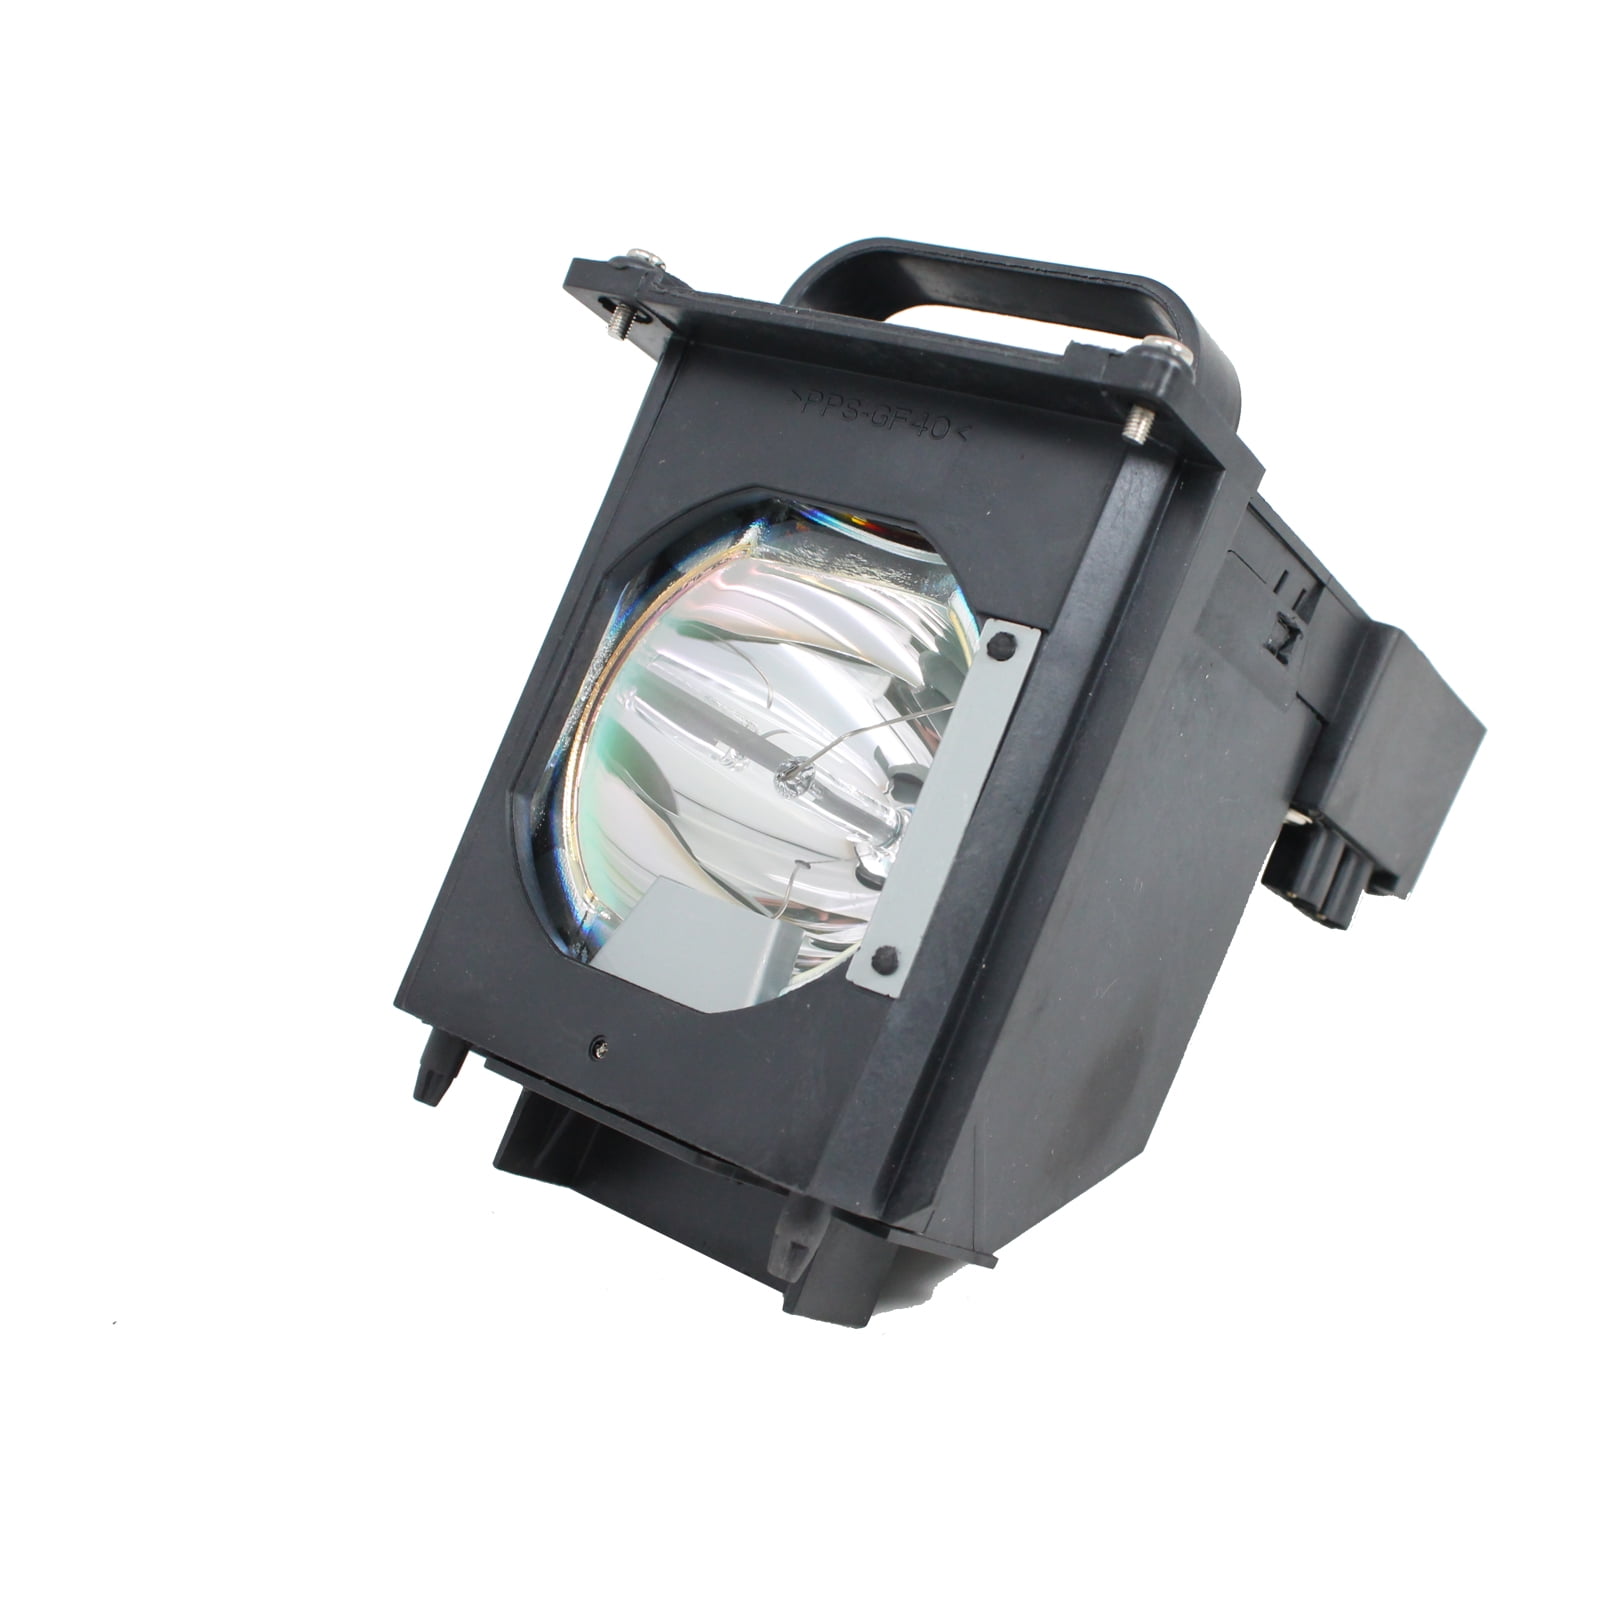 915B403001 Replacement Lamp for Mitsubishi TV BANENS Replacement Lamp Bulb with Housing. 